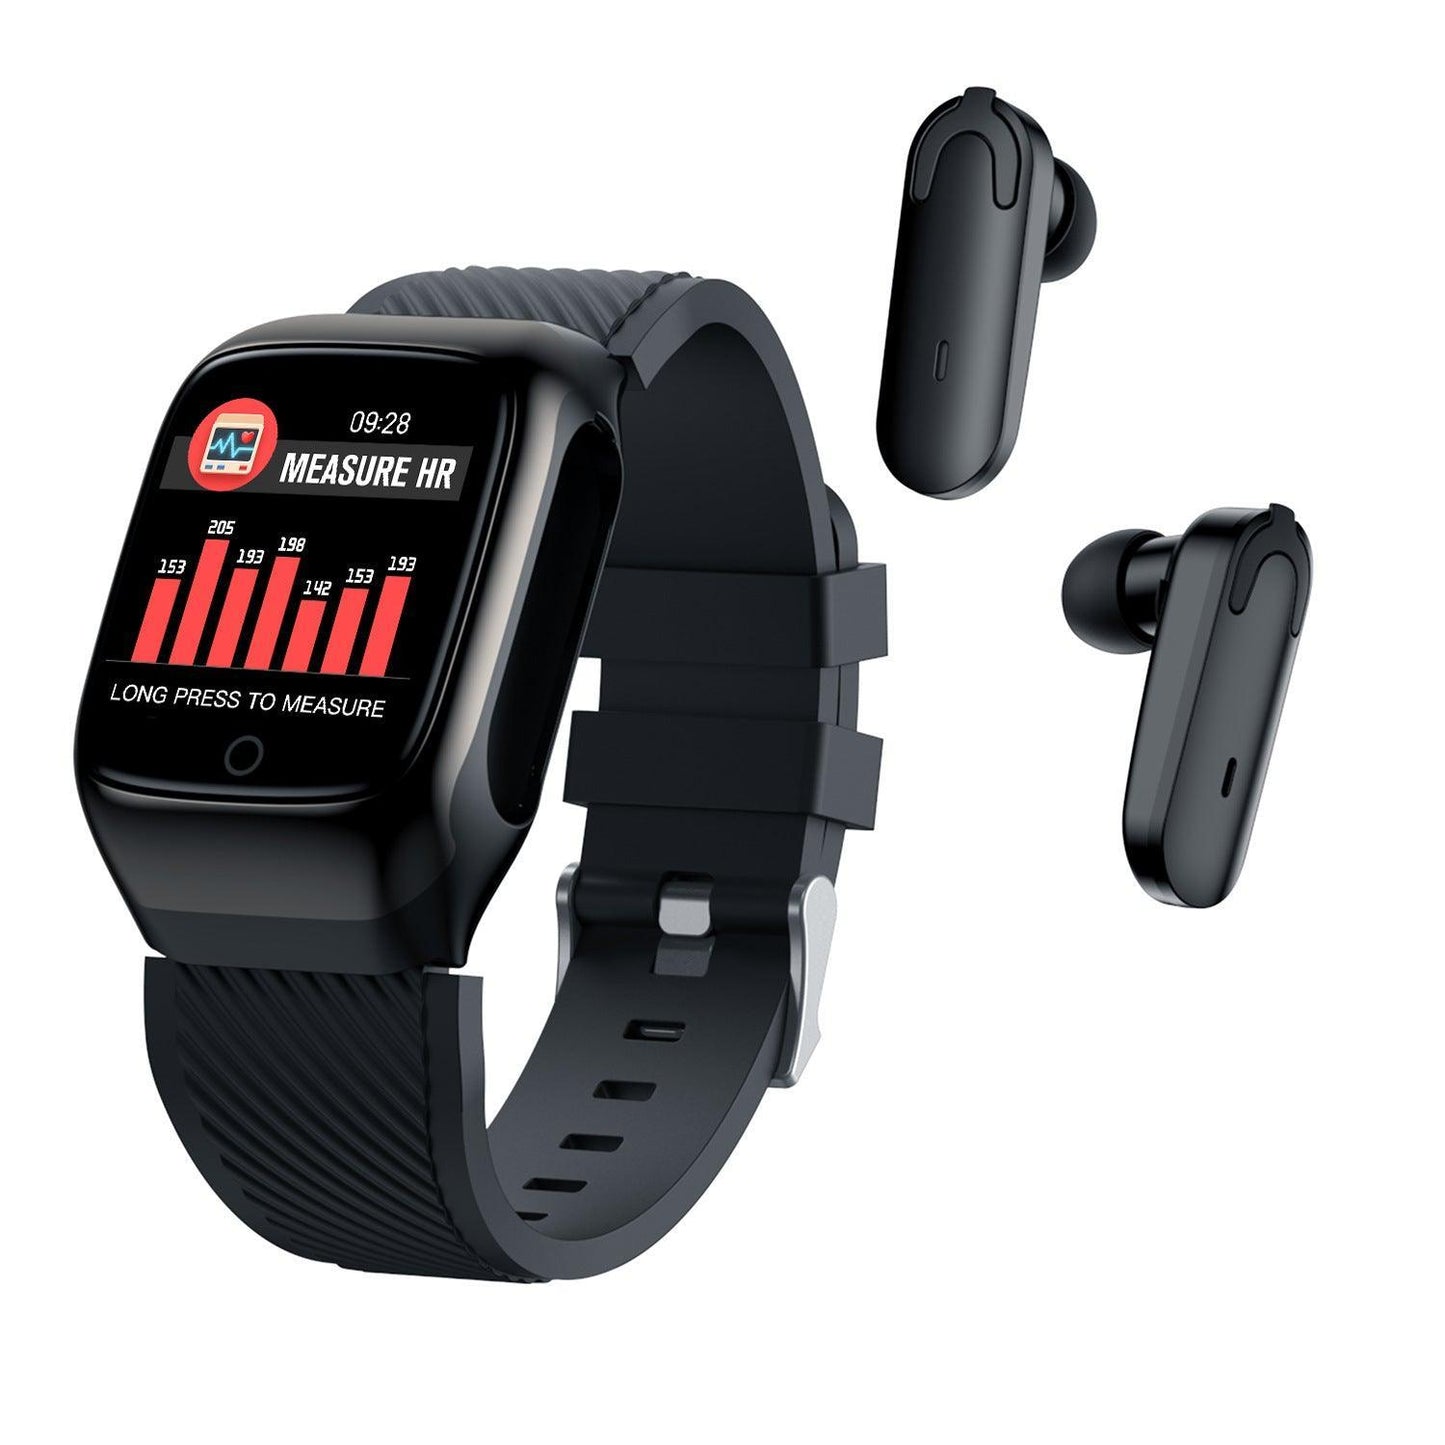 Smart Watch With Earbuds - ForVanity men's jewellery & watches, smart watches Smartwatches